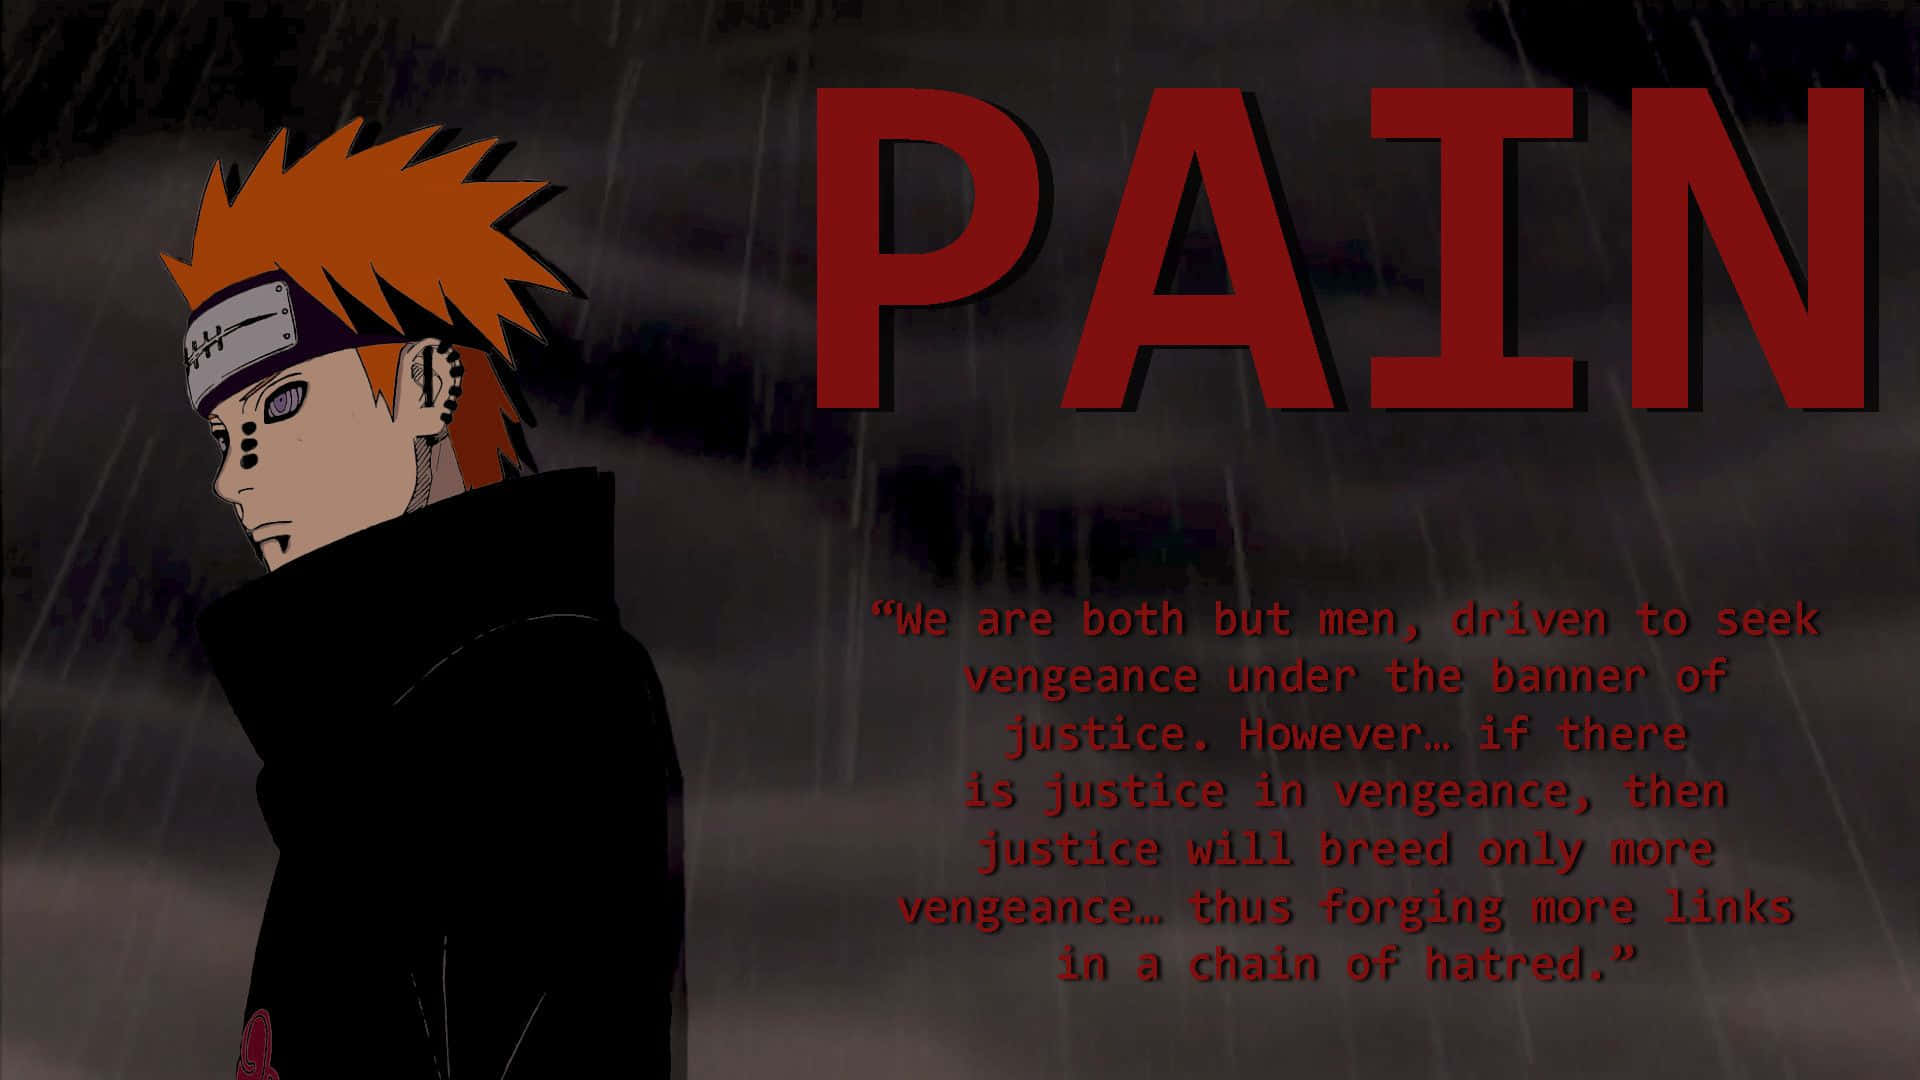 A leader of Akatsuki, Pain symbolizes the determination of justice. Wallpaper